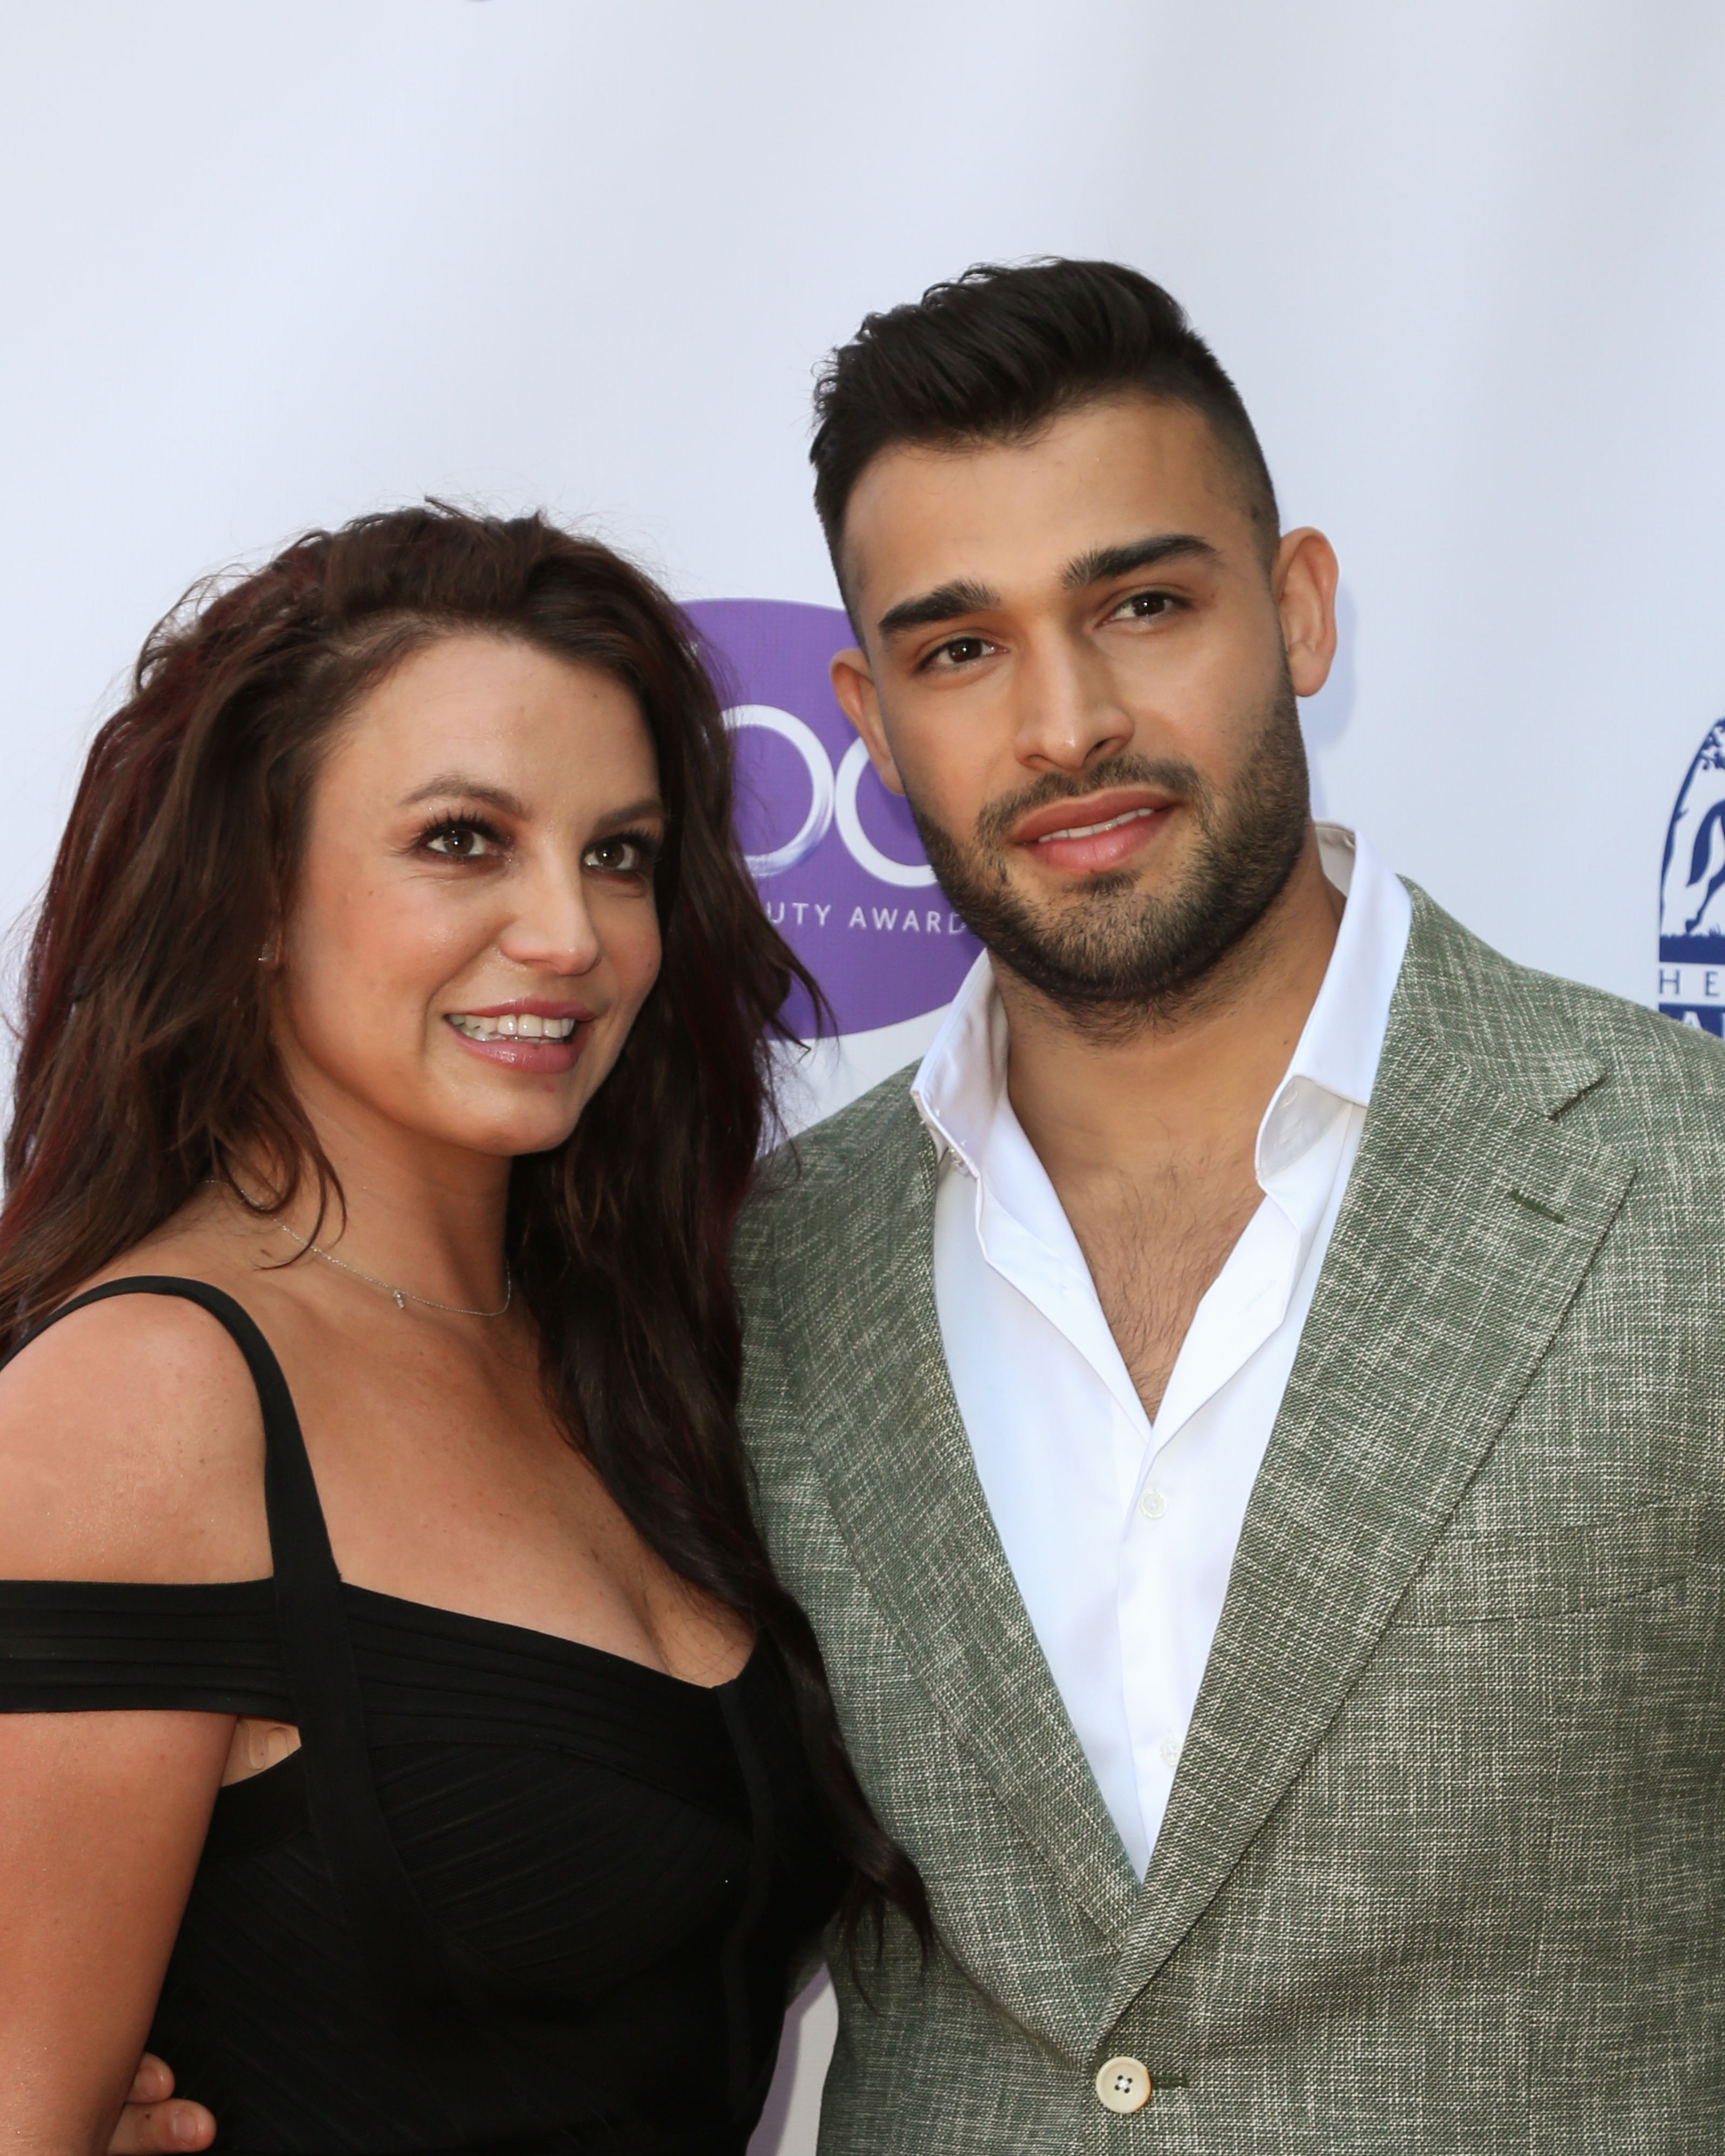 Britney Spears and Sam Asghari at the Daytime Beauty Awards on September 20, 2019, in Los Angeles, California | Source: Getty Images